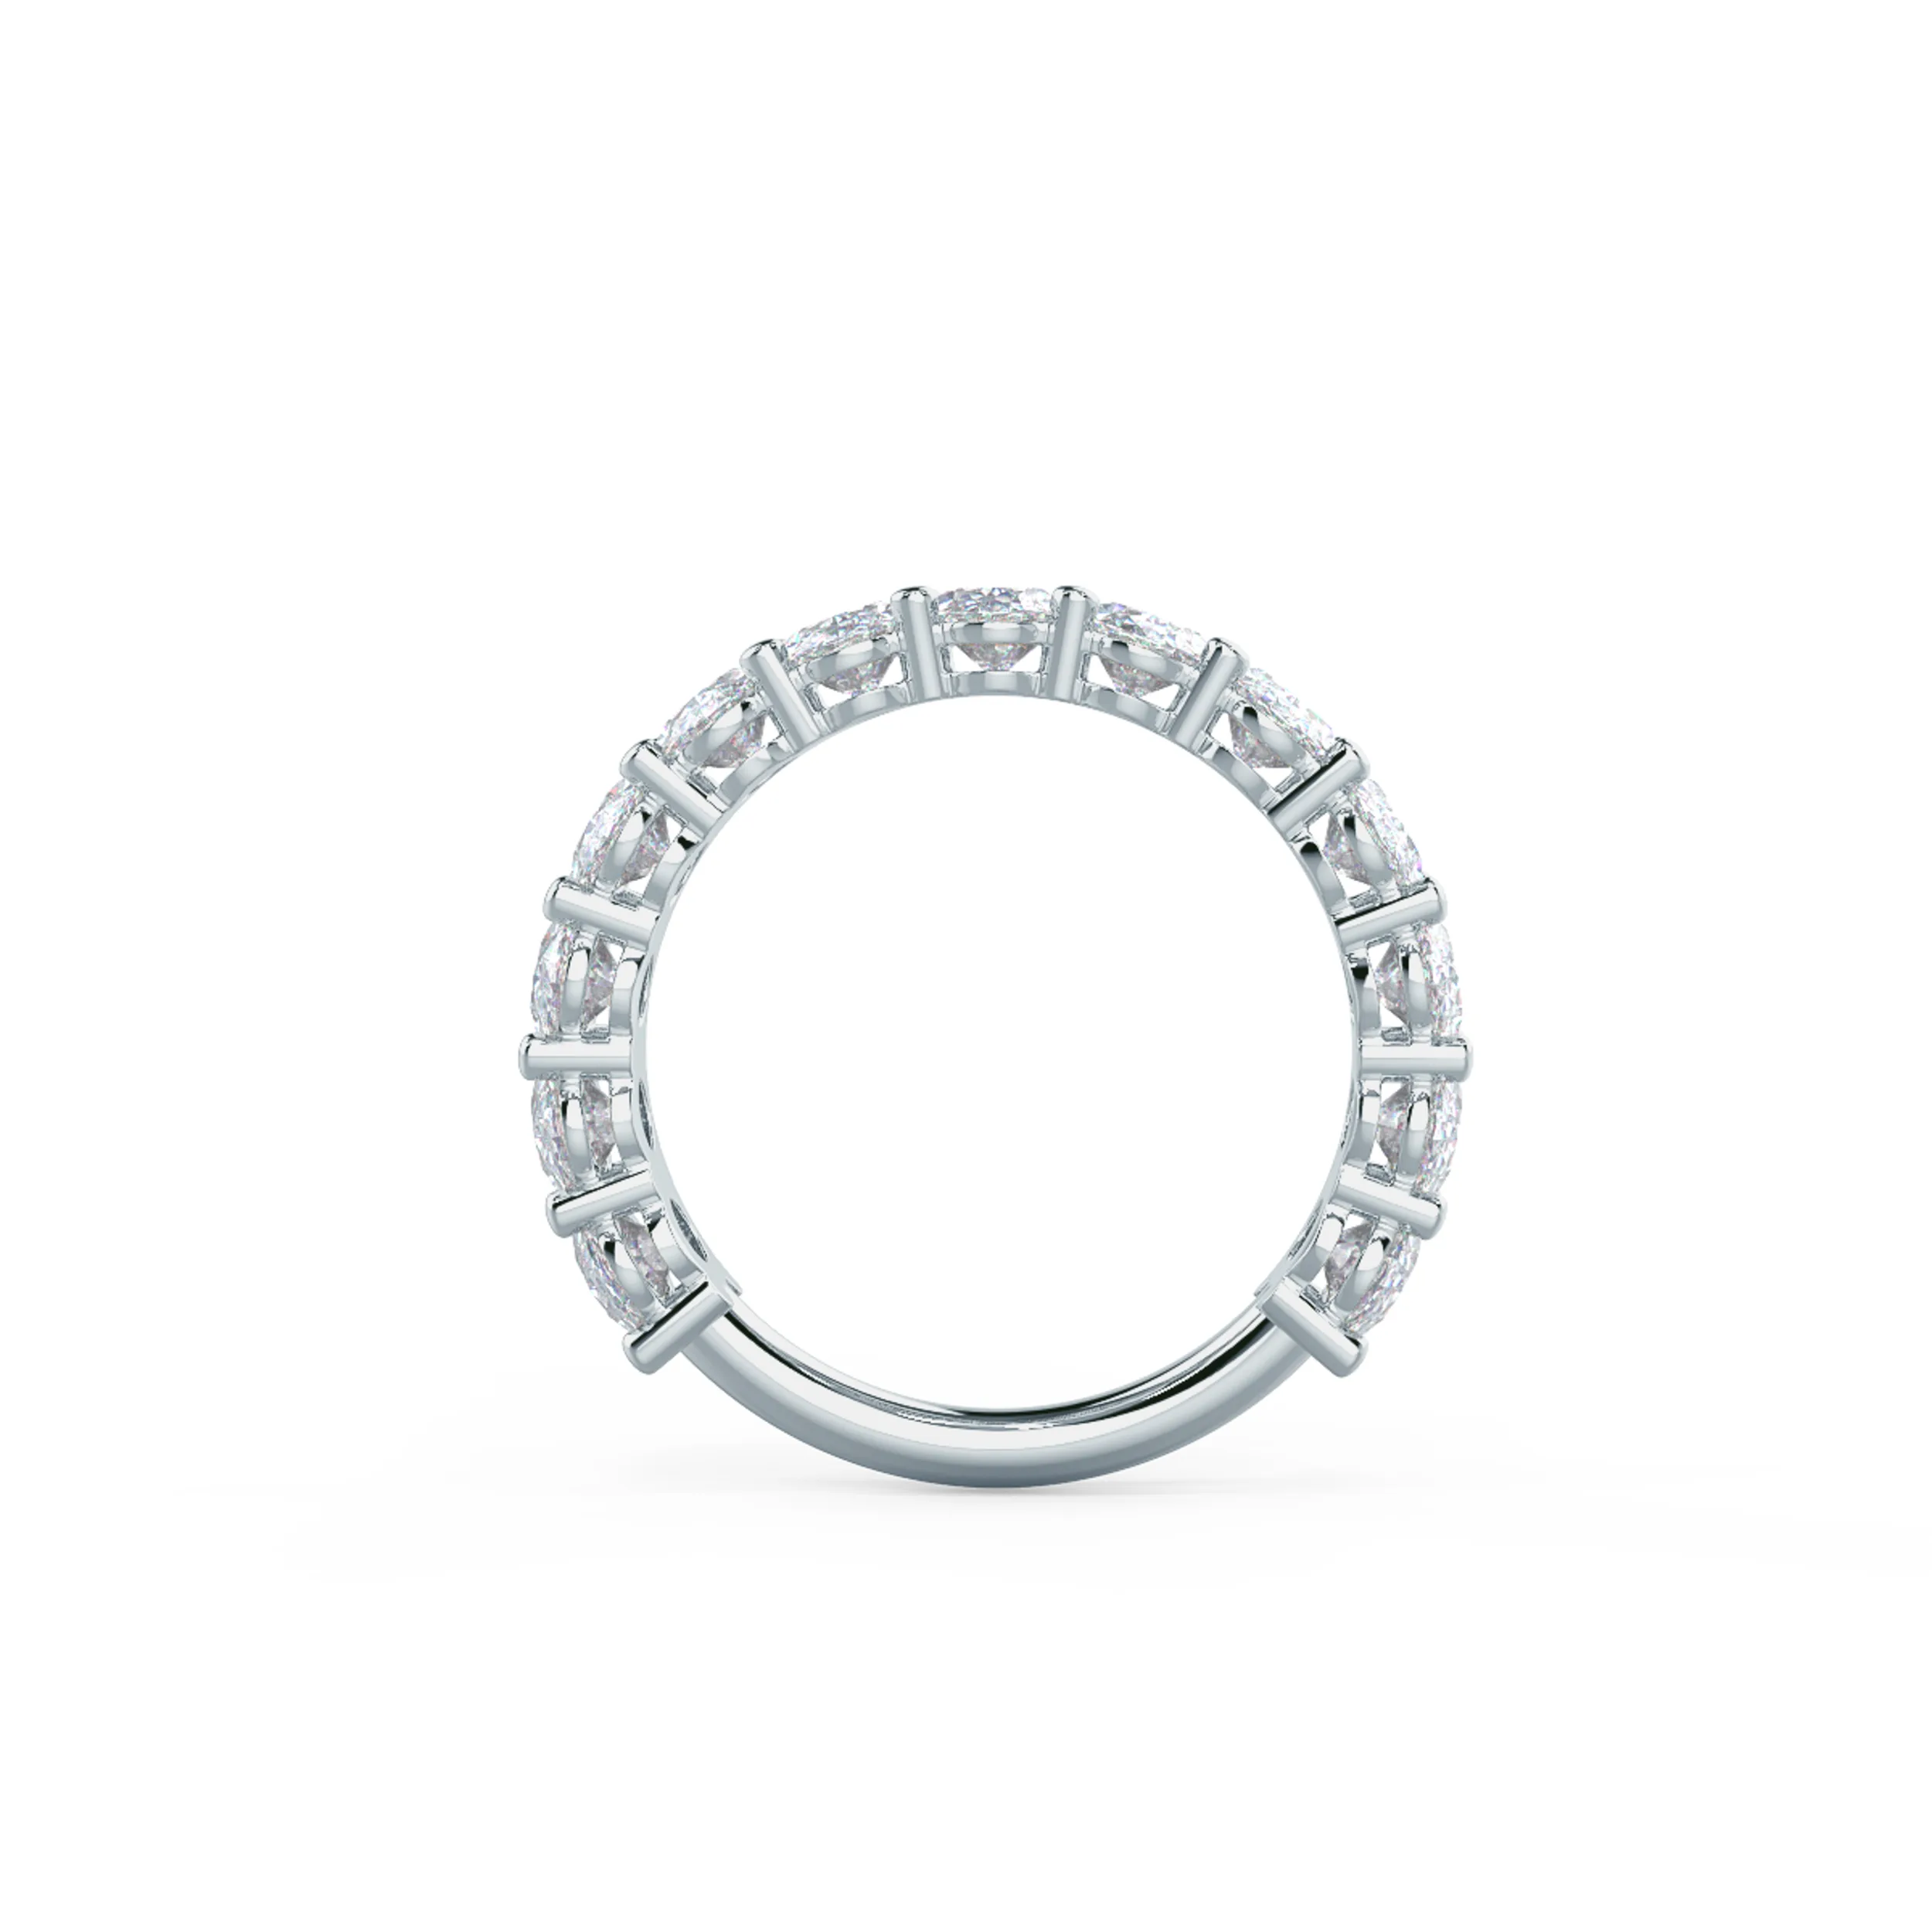 4.0 ct Lab Created Diamonds set in 18k White Gold Oval Basket Three Quarter Band (Profile View)